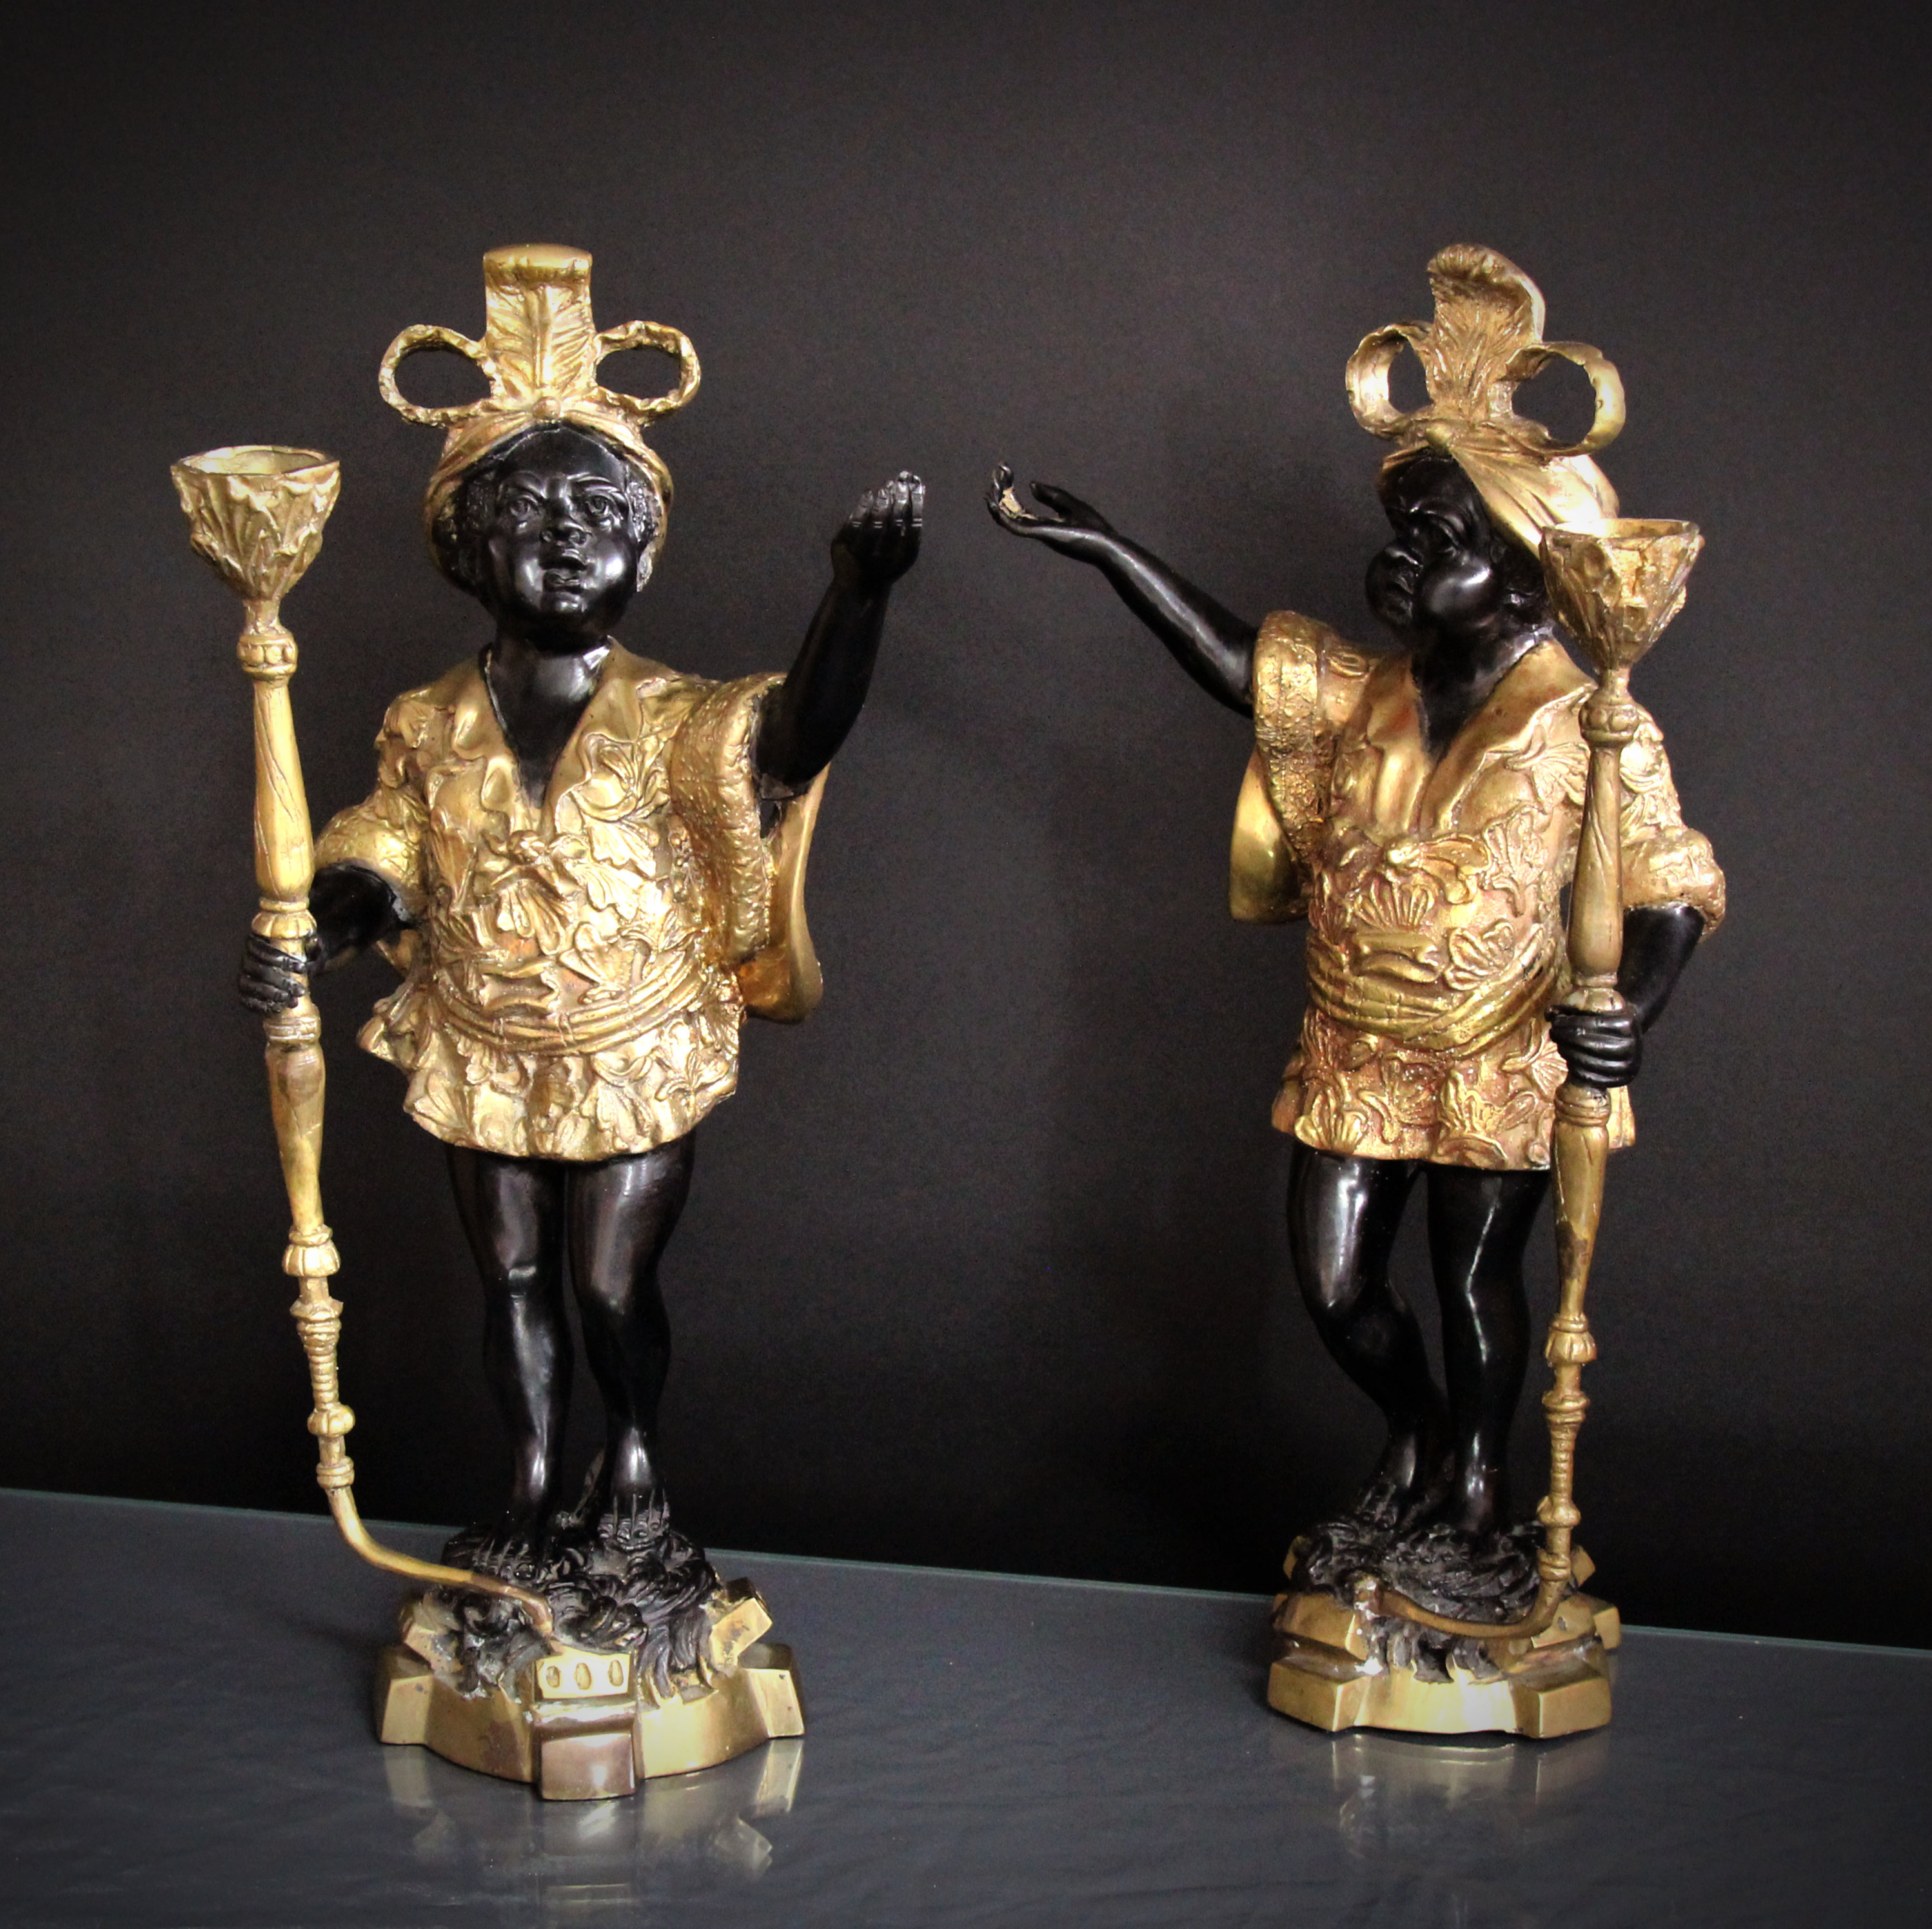 Pair of antique bronze candle holders - Monarts Gallery - Antiques